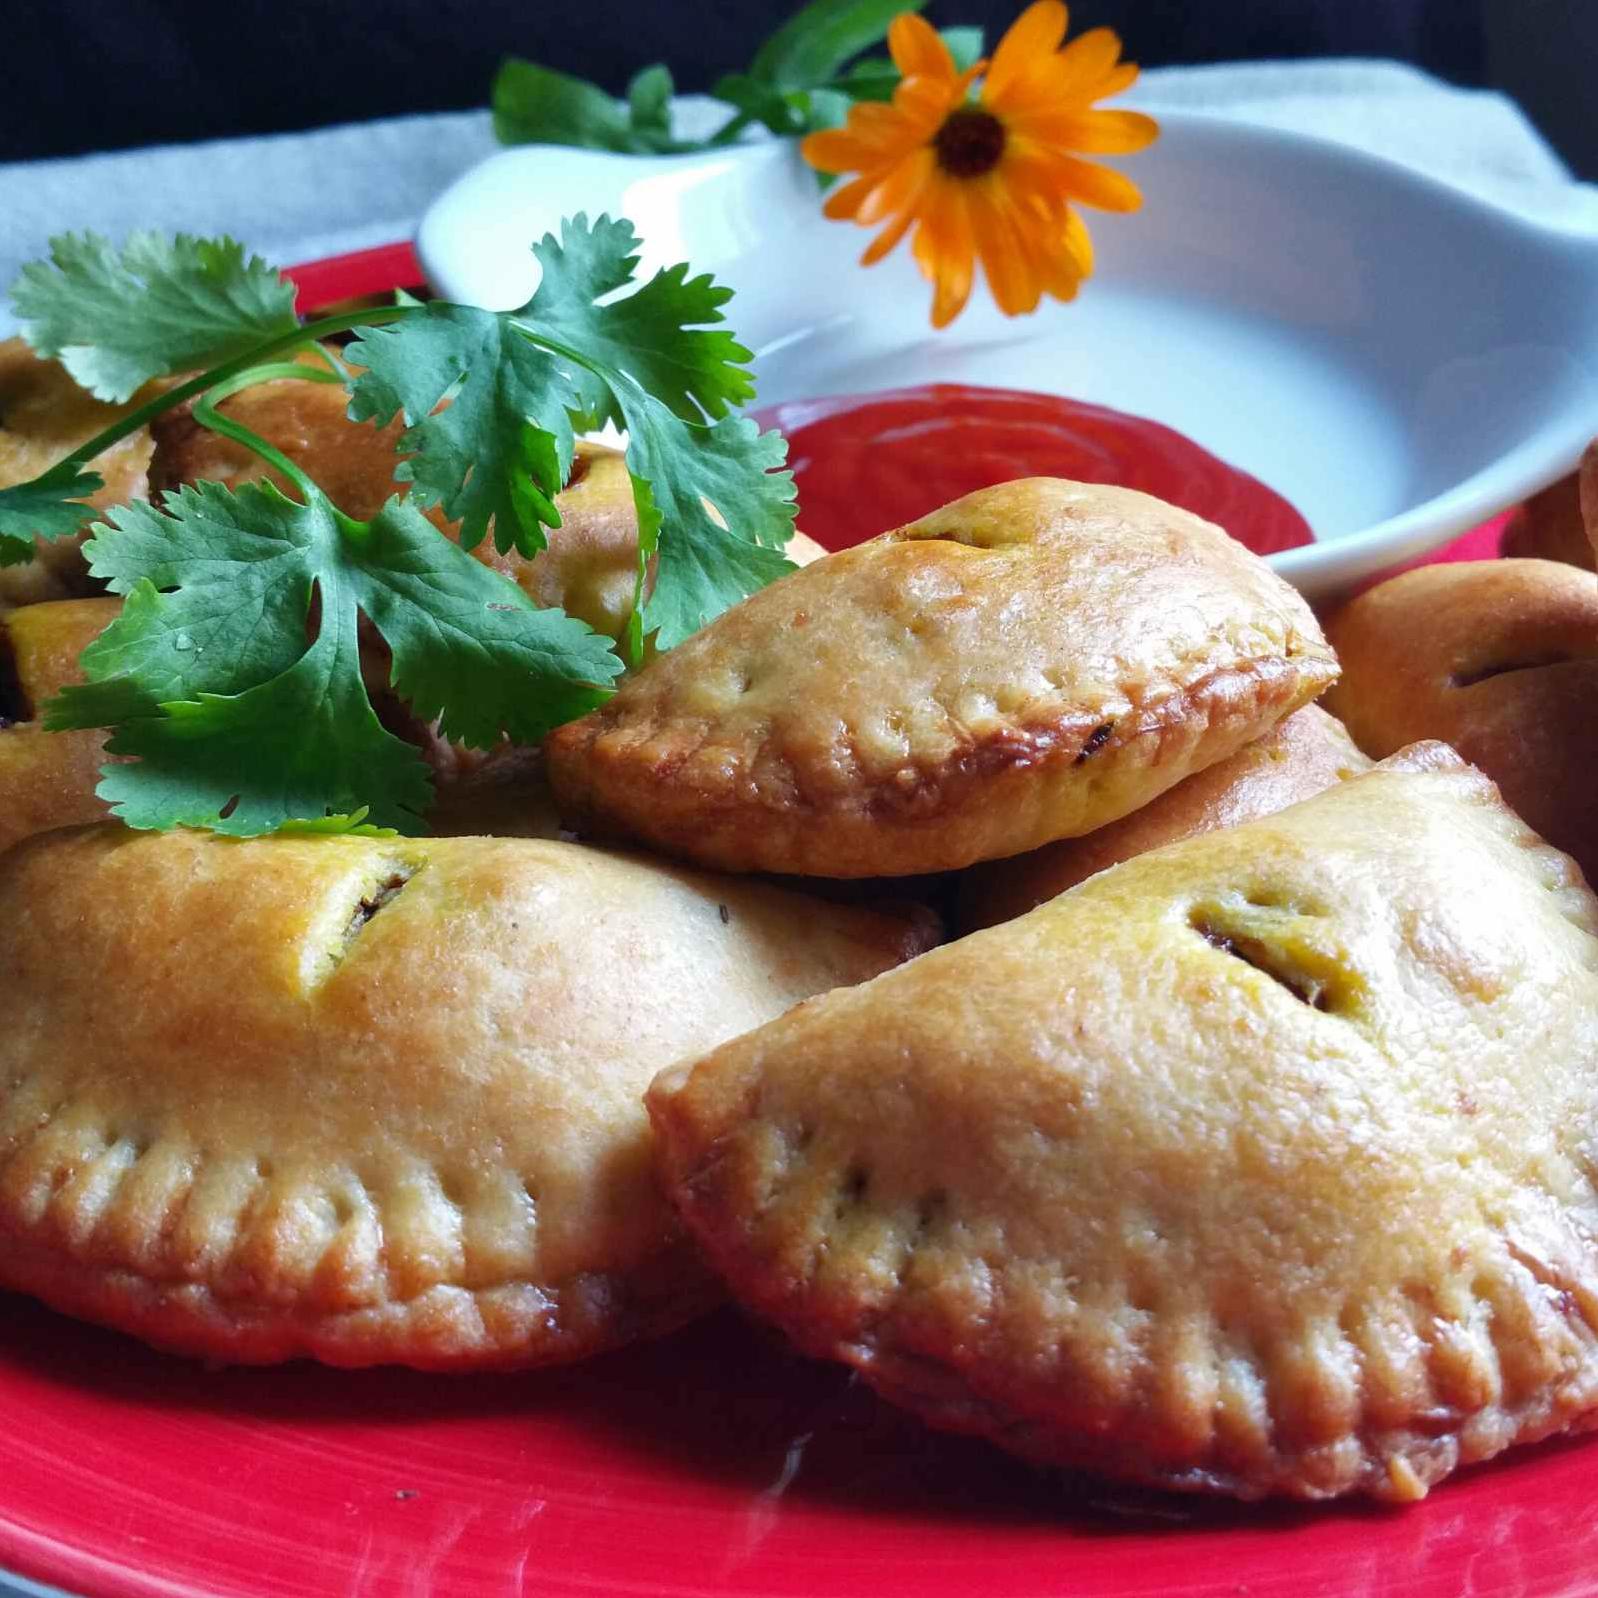  These empanadas are filled with a rich and flavorful mushroom and sherry filling.